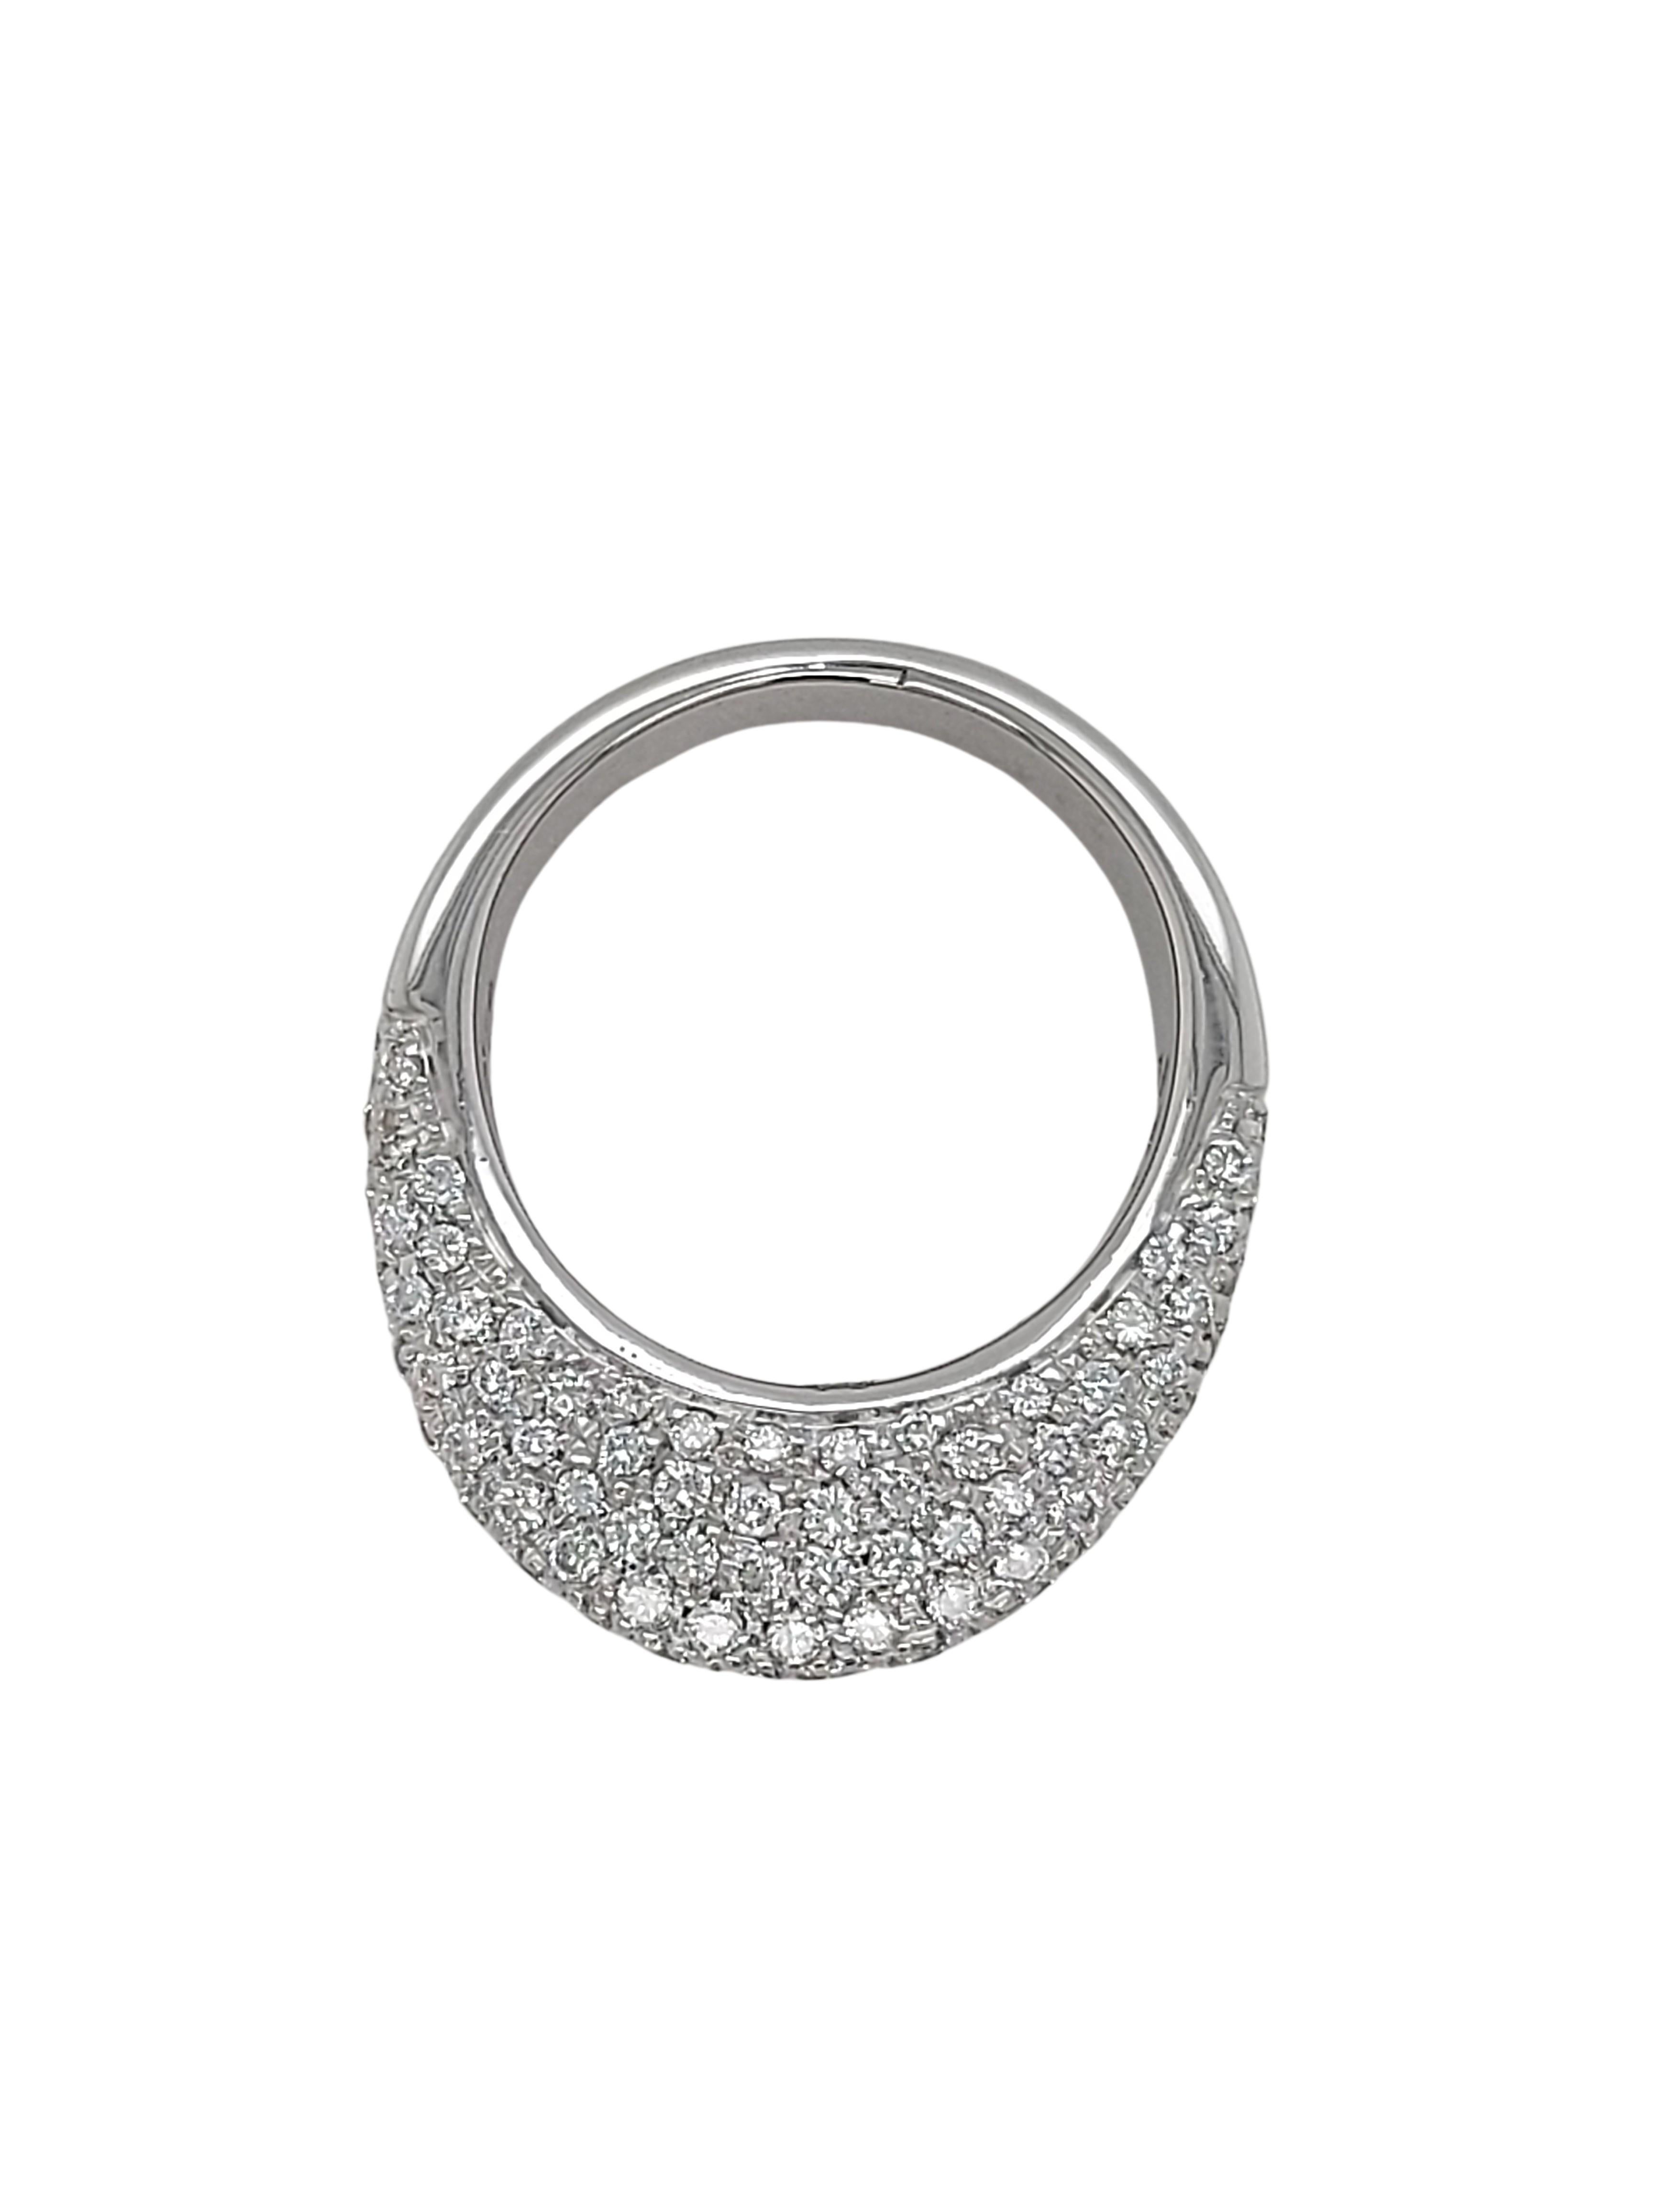 Stunning 18kt White Gold Ring with 4.22ct Brilliant Cut Diamonds E/F VVS-Loupe Clean

Diamonds: 211 brilliant cut diamonds, together 4.22ct

Material: 18kt white gold

Total weight: 15.5 gram / 0.545 oz / 10.0 dwt

Ring size: 57 EU  / 8 US ( can be